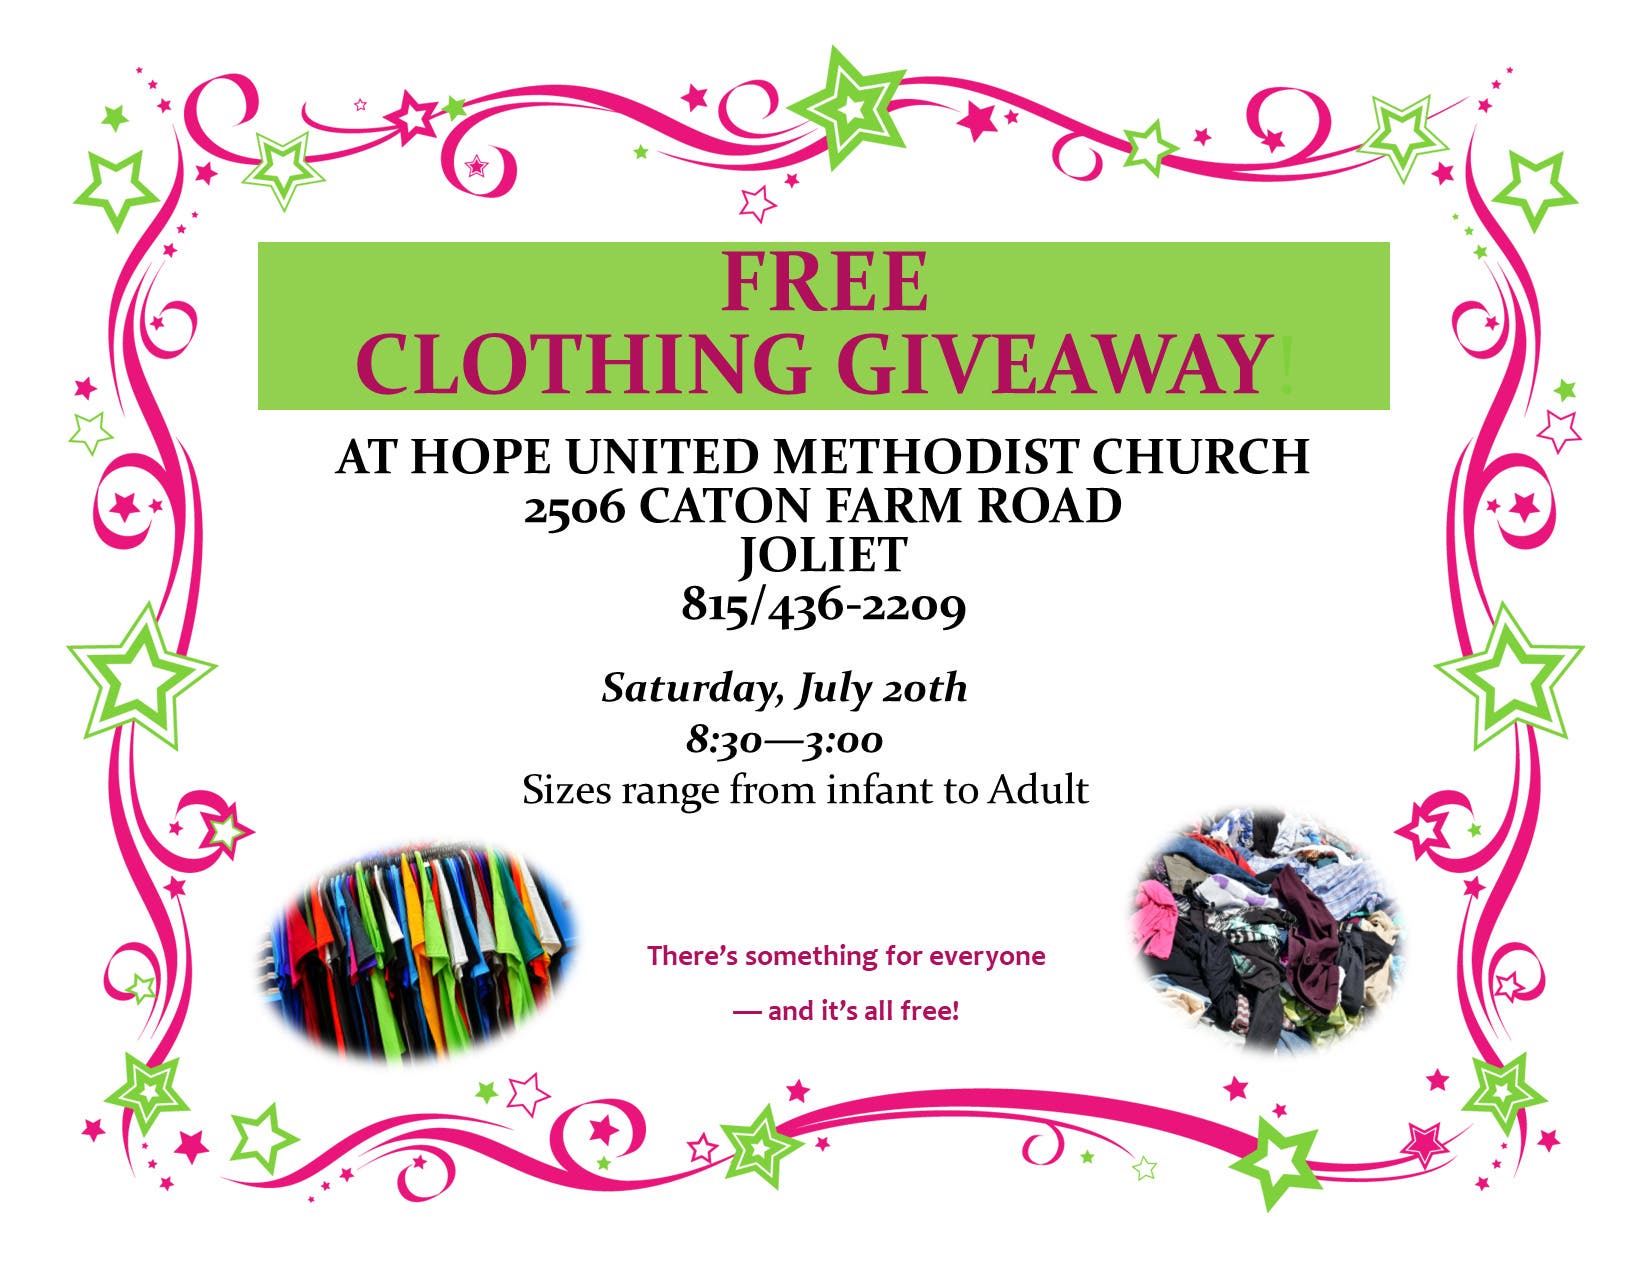 Free Clothing Giveaway!